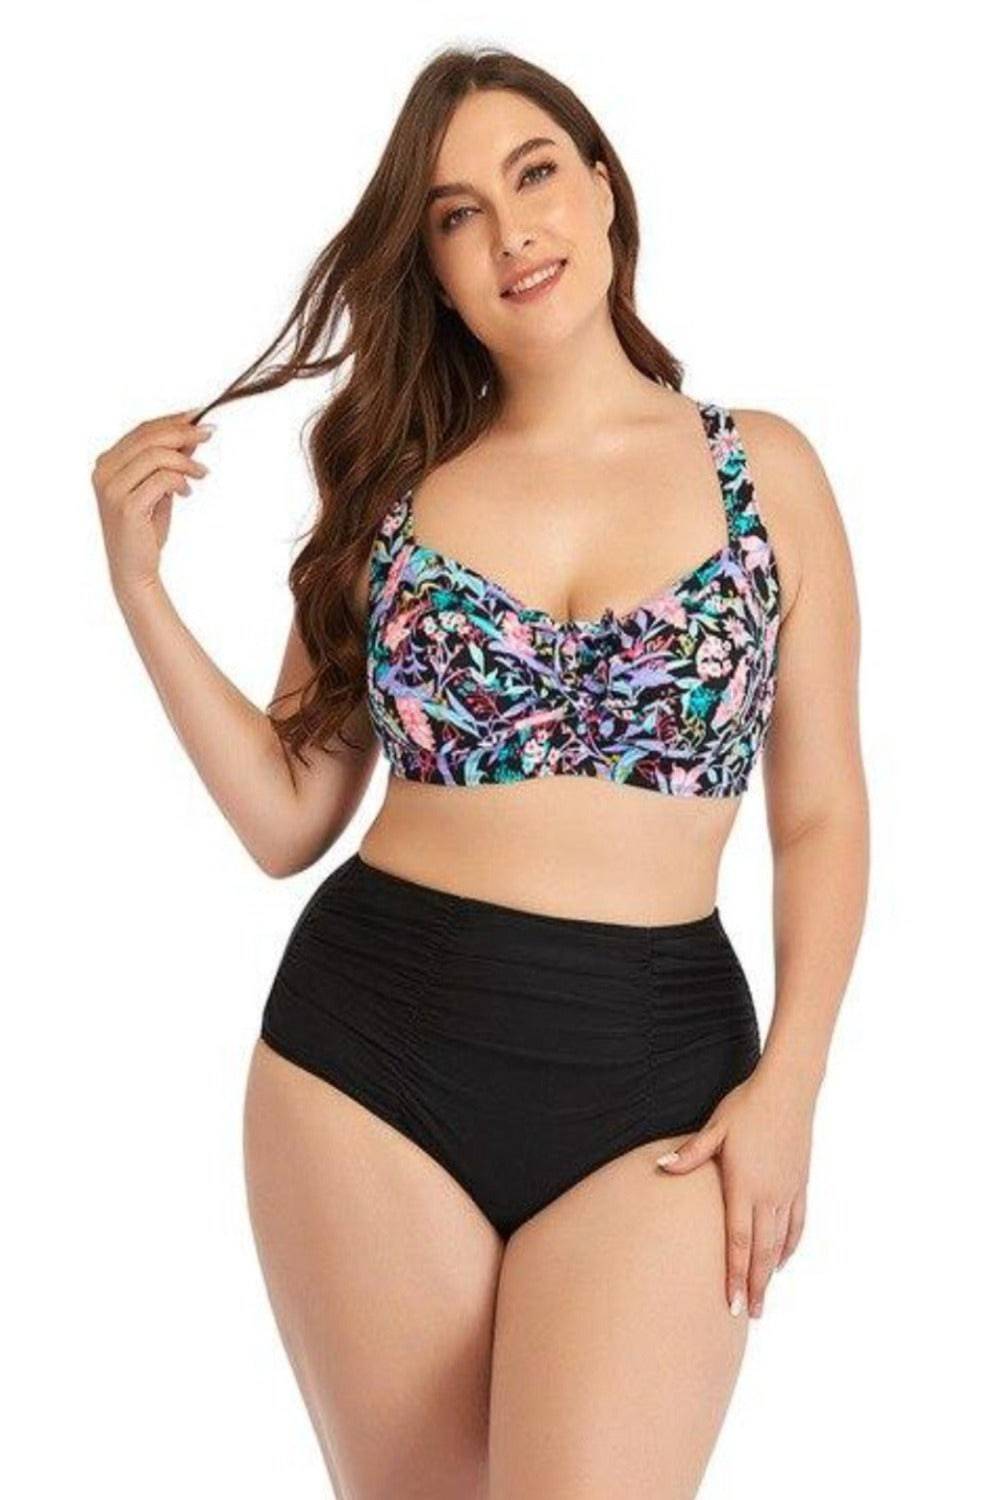 Swimsuits For All Women's Plus Size Diva Halter Bikini Top - 12, Watercolor  Floral : Target